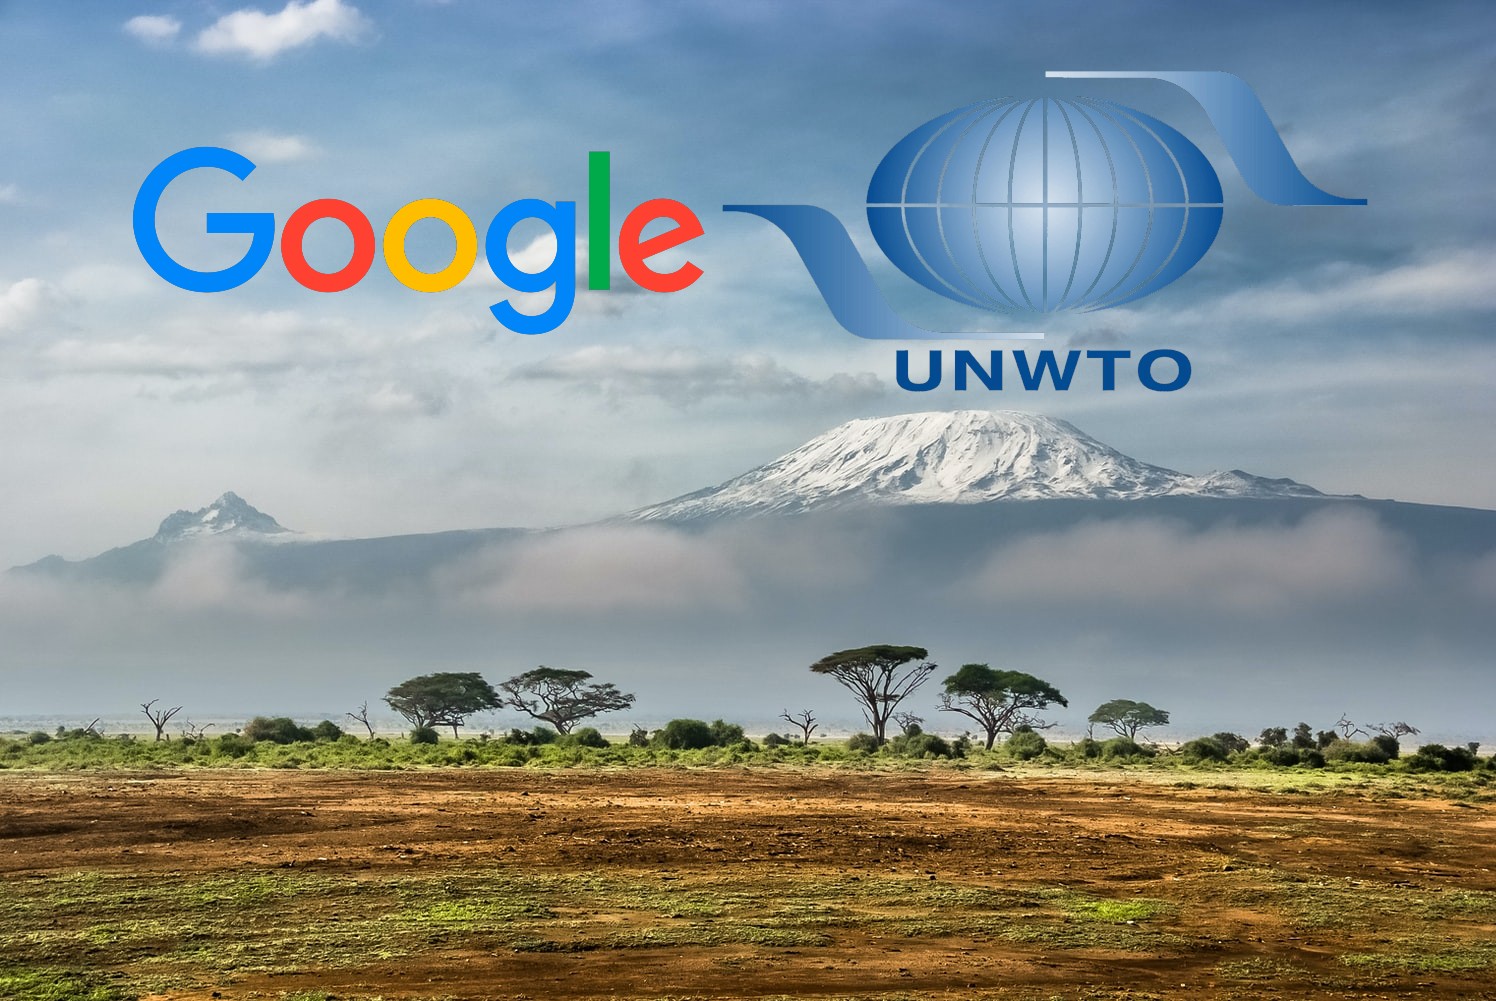 African landscape and the UNWTO and Google logos